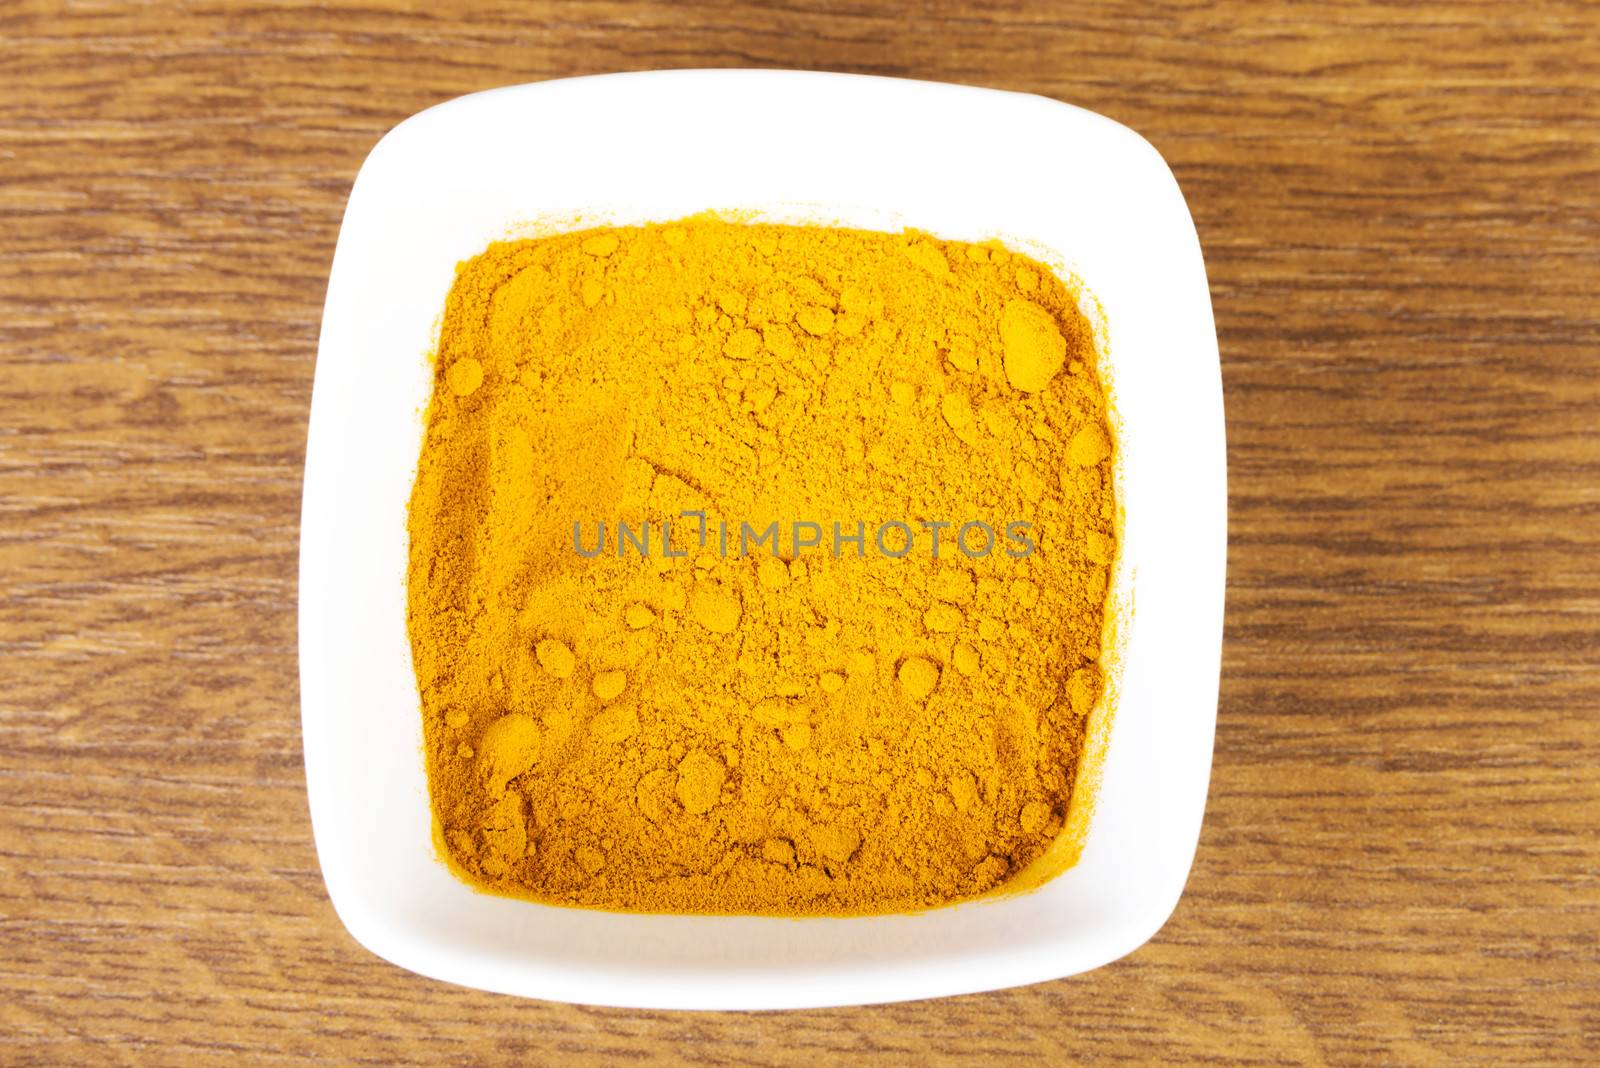 Curcuma, curry, yellow- orange spice in a bowl. Over wooden background.